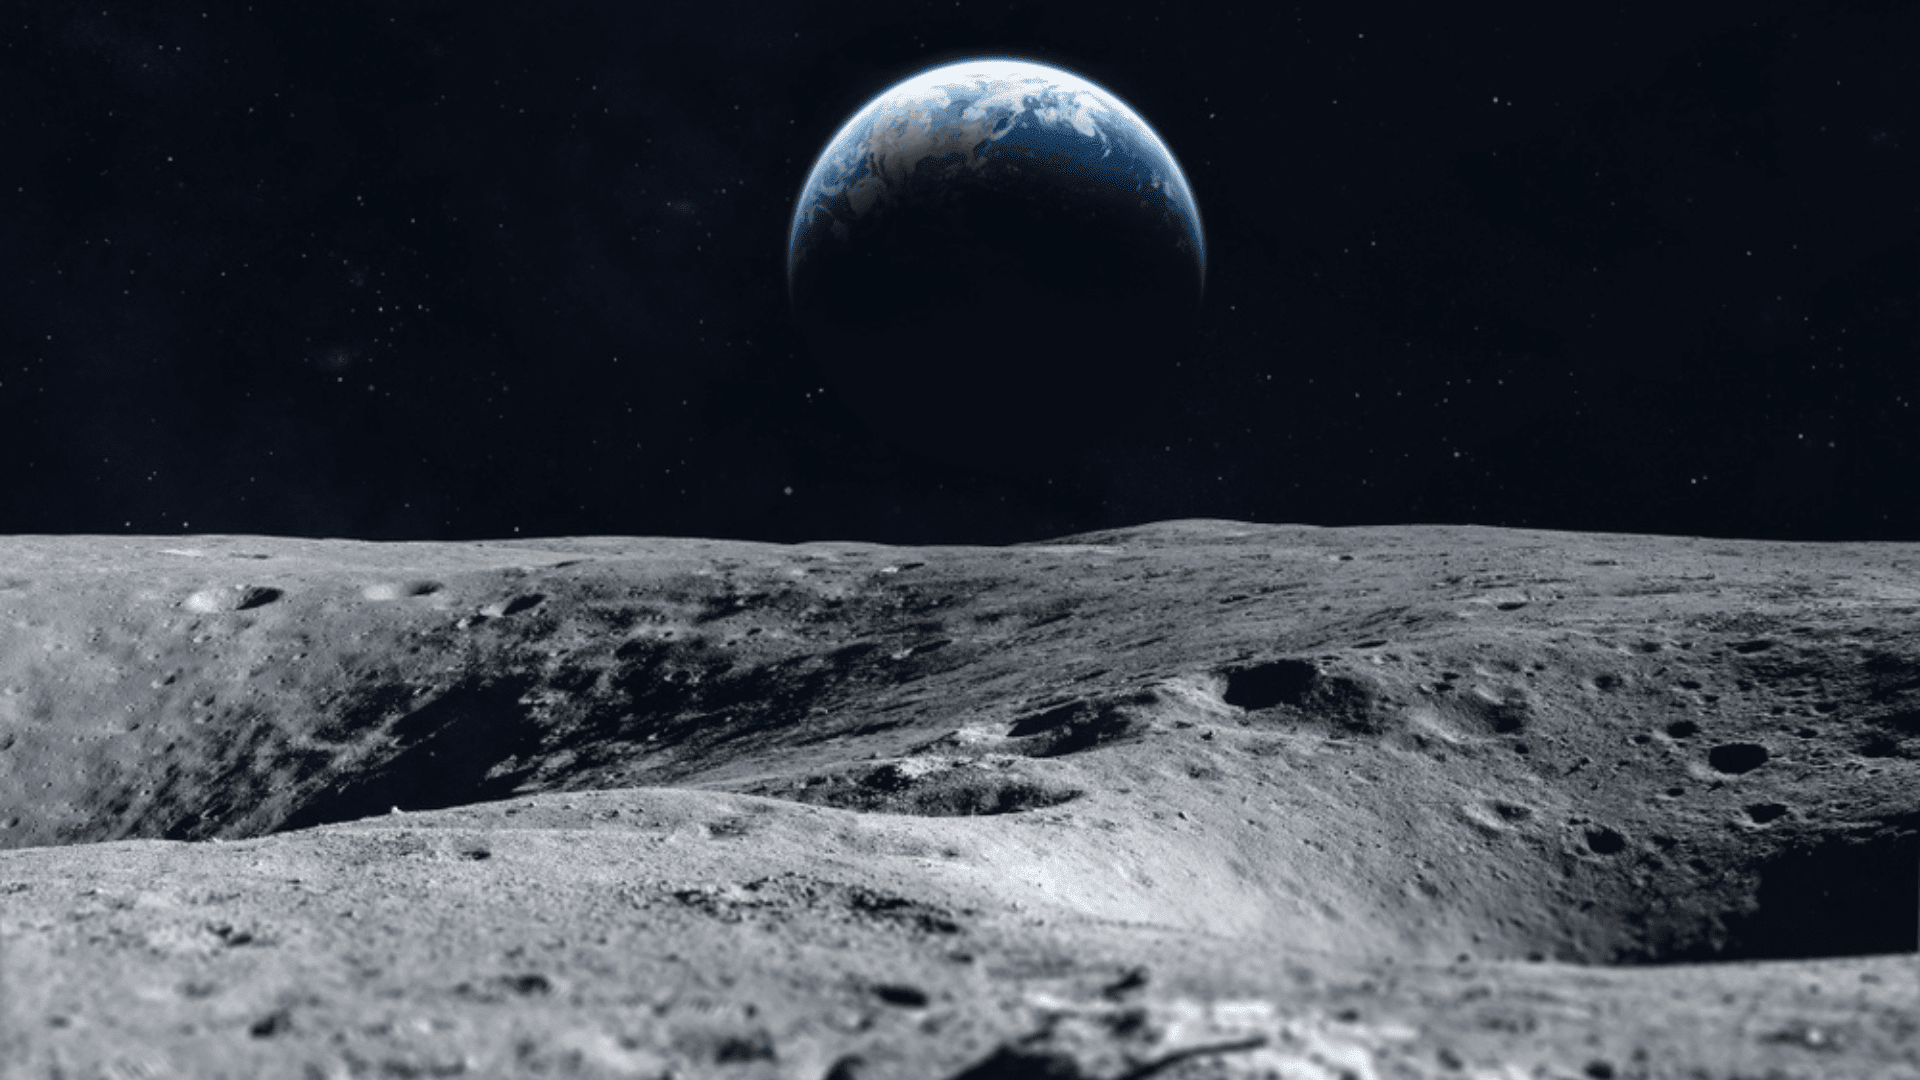 Moon is shrinking, causing moonquakes and lunar instability